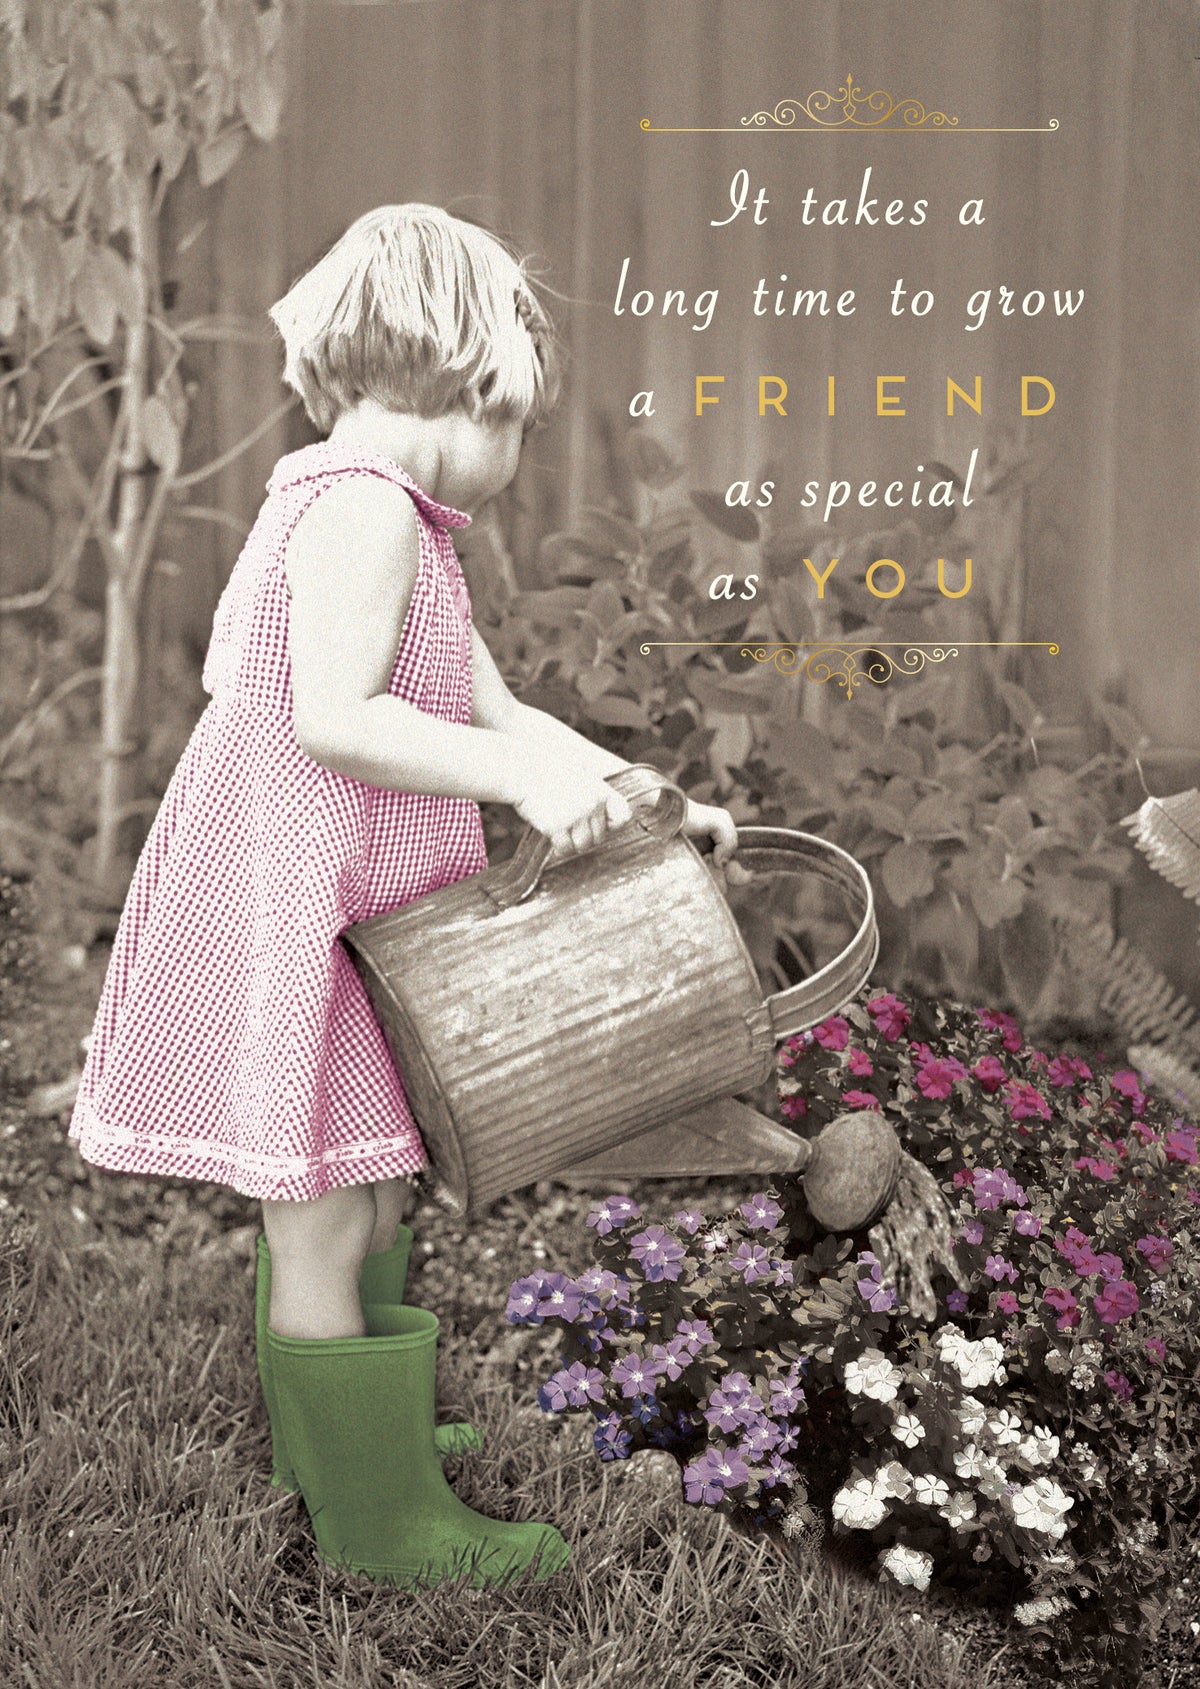 Grow a Special Friend Card from Penny Black